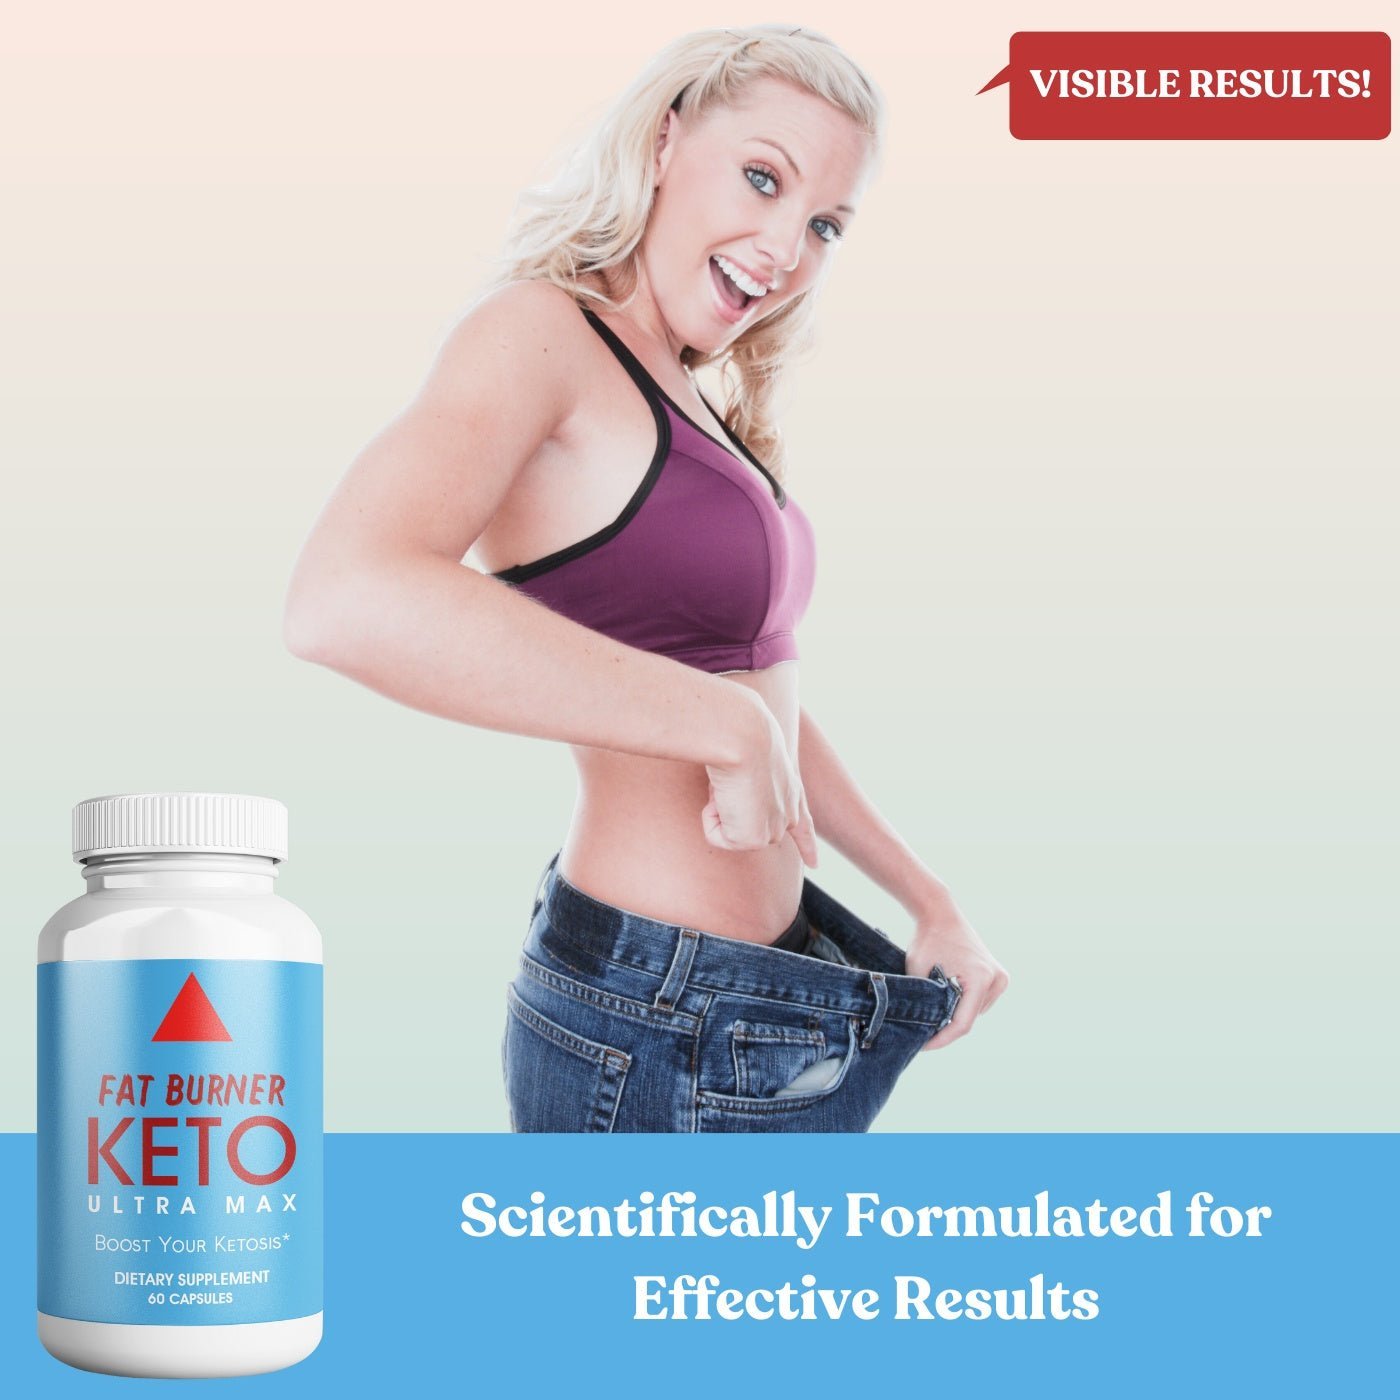 Keto Ultra Max: Advanced Weight Management, Boost Energy, Focus | 2-Pack - Herblif Nutrition USA